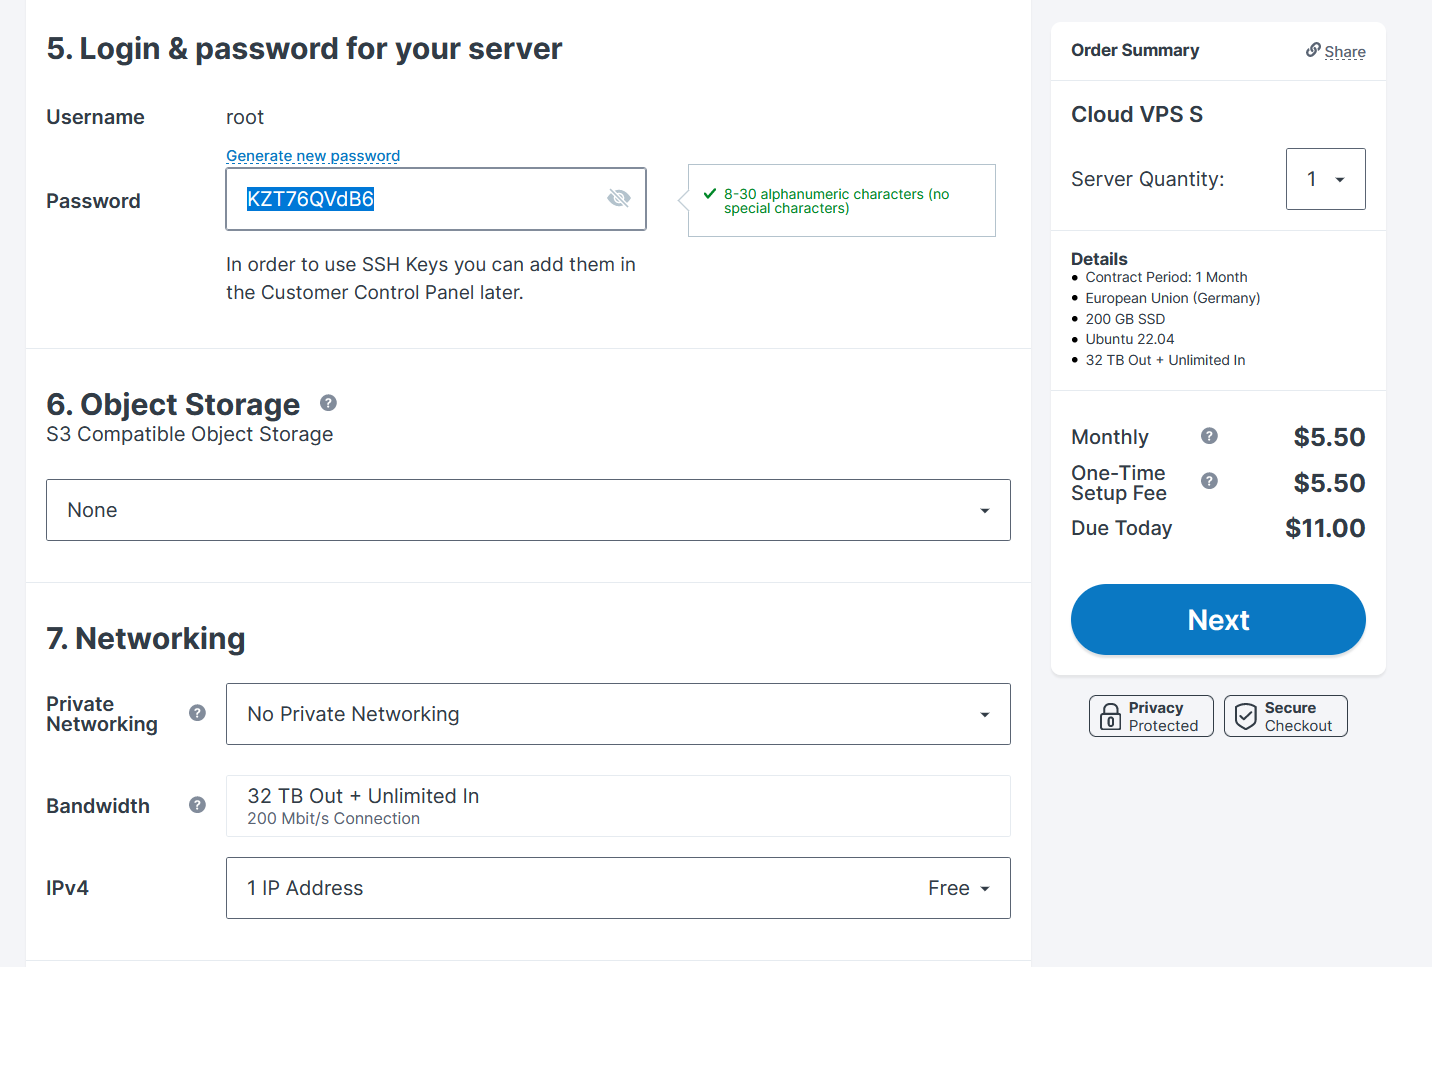 Contabo VPS Login & password for your server, Object Storage and Networking